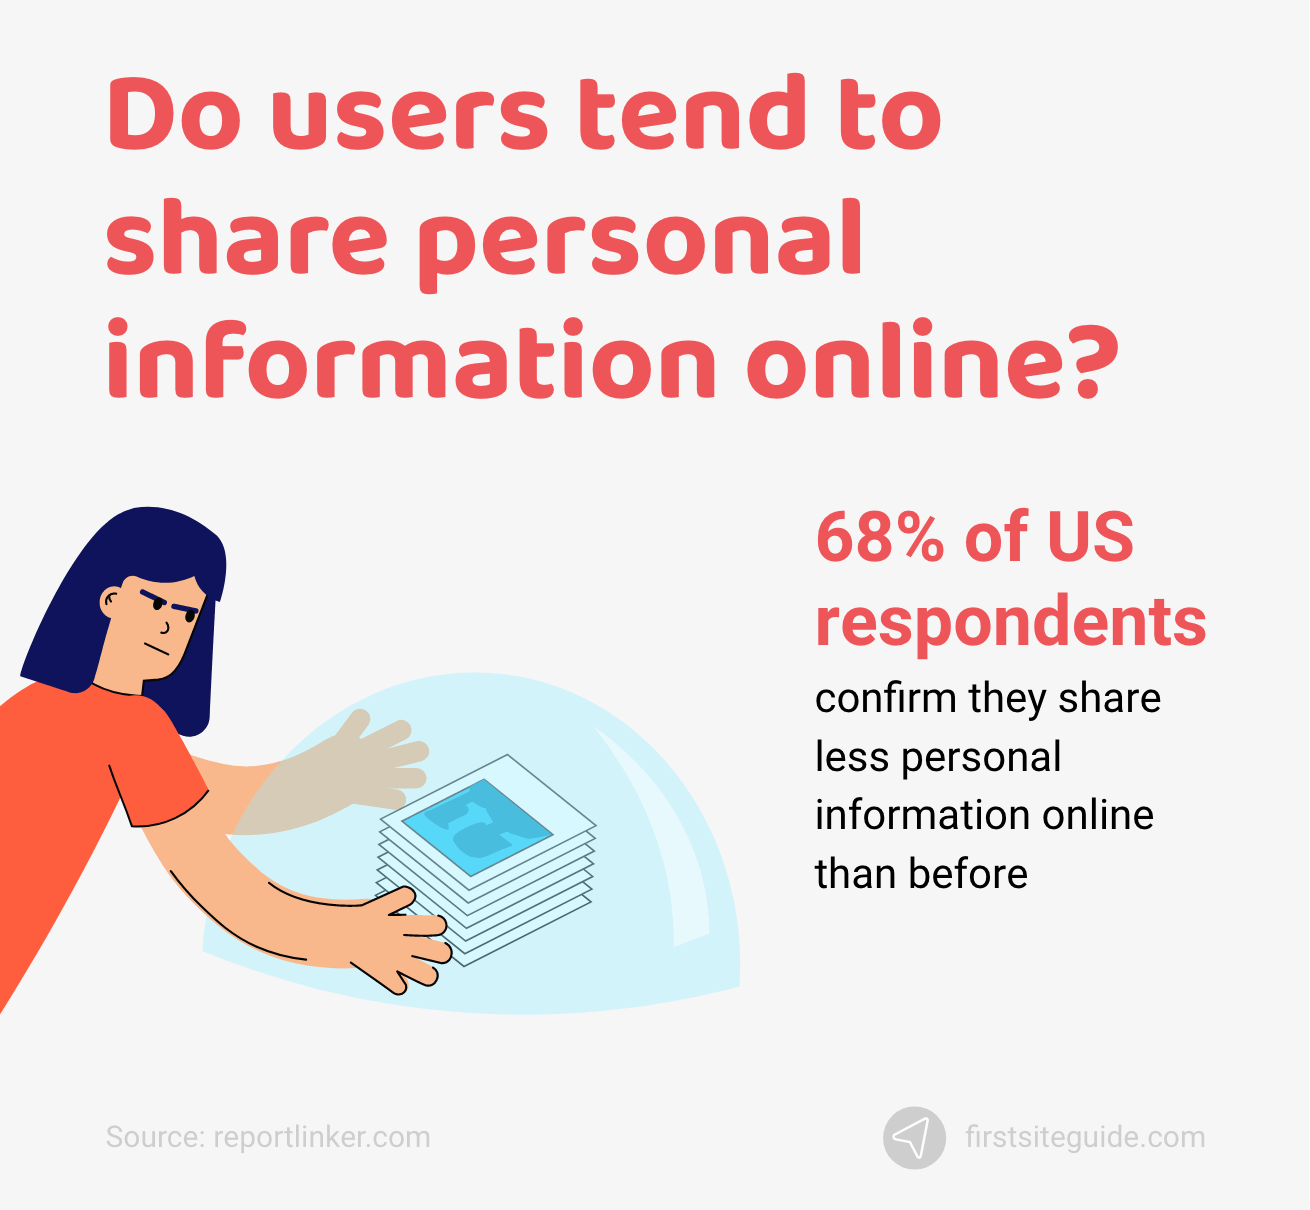 Do users tend to share personal information online